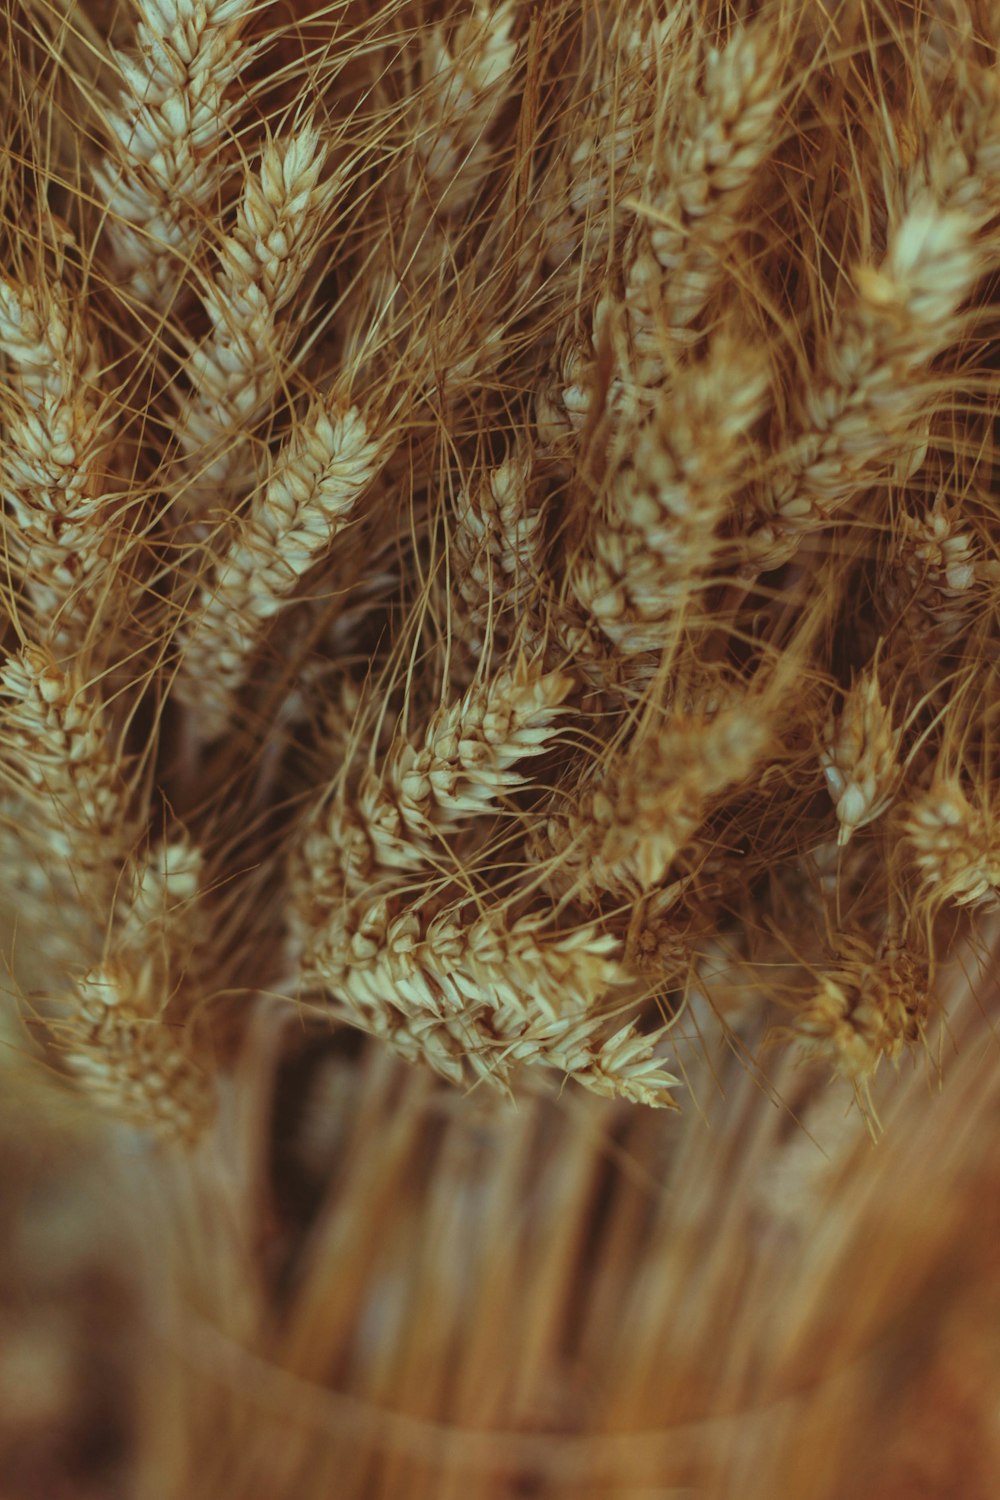 a close up of a bunch of wheat